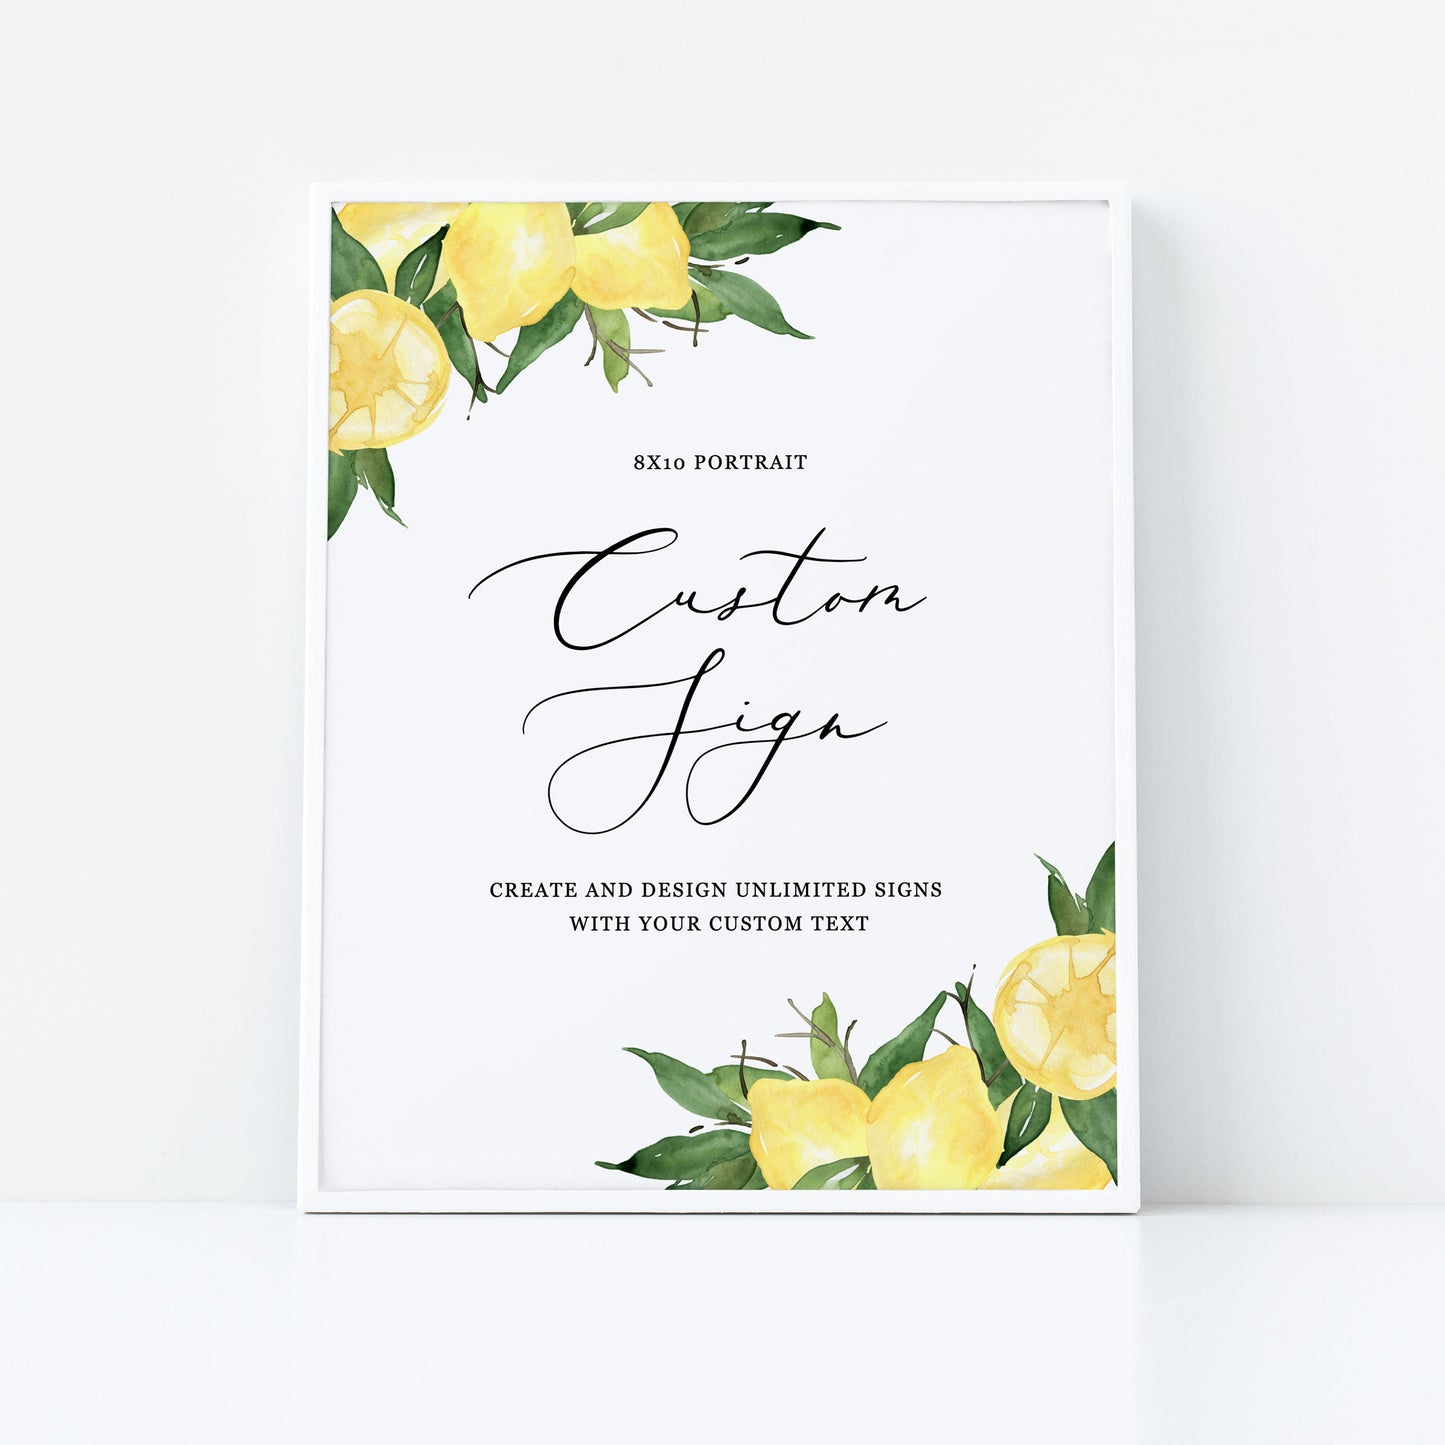 Editable Custom Wedding Sign Lemon Citrus Bridal Shower Sign Kit Create Unlimited Signs 8x10 and 10x8 Template